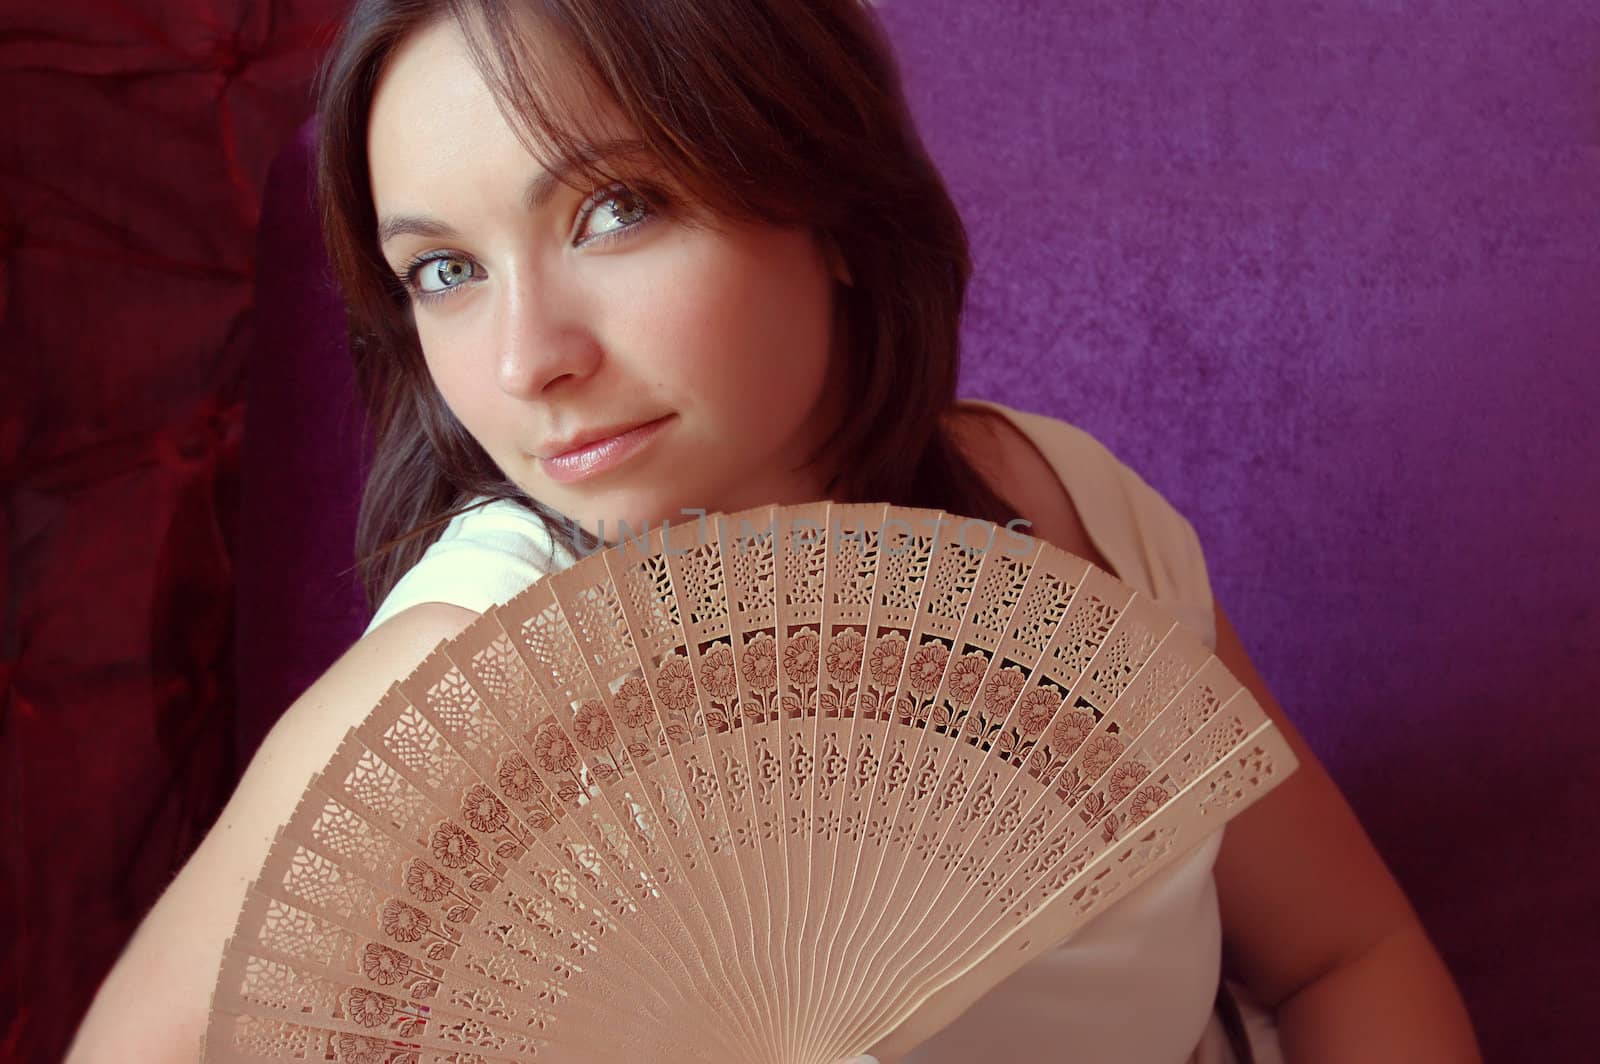 woman with opened fan on violet background